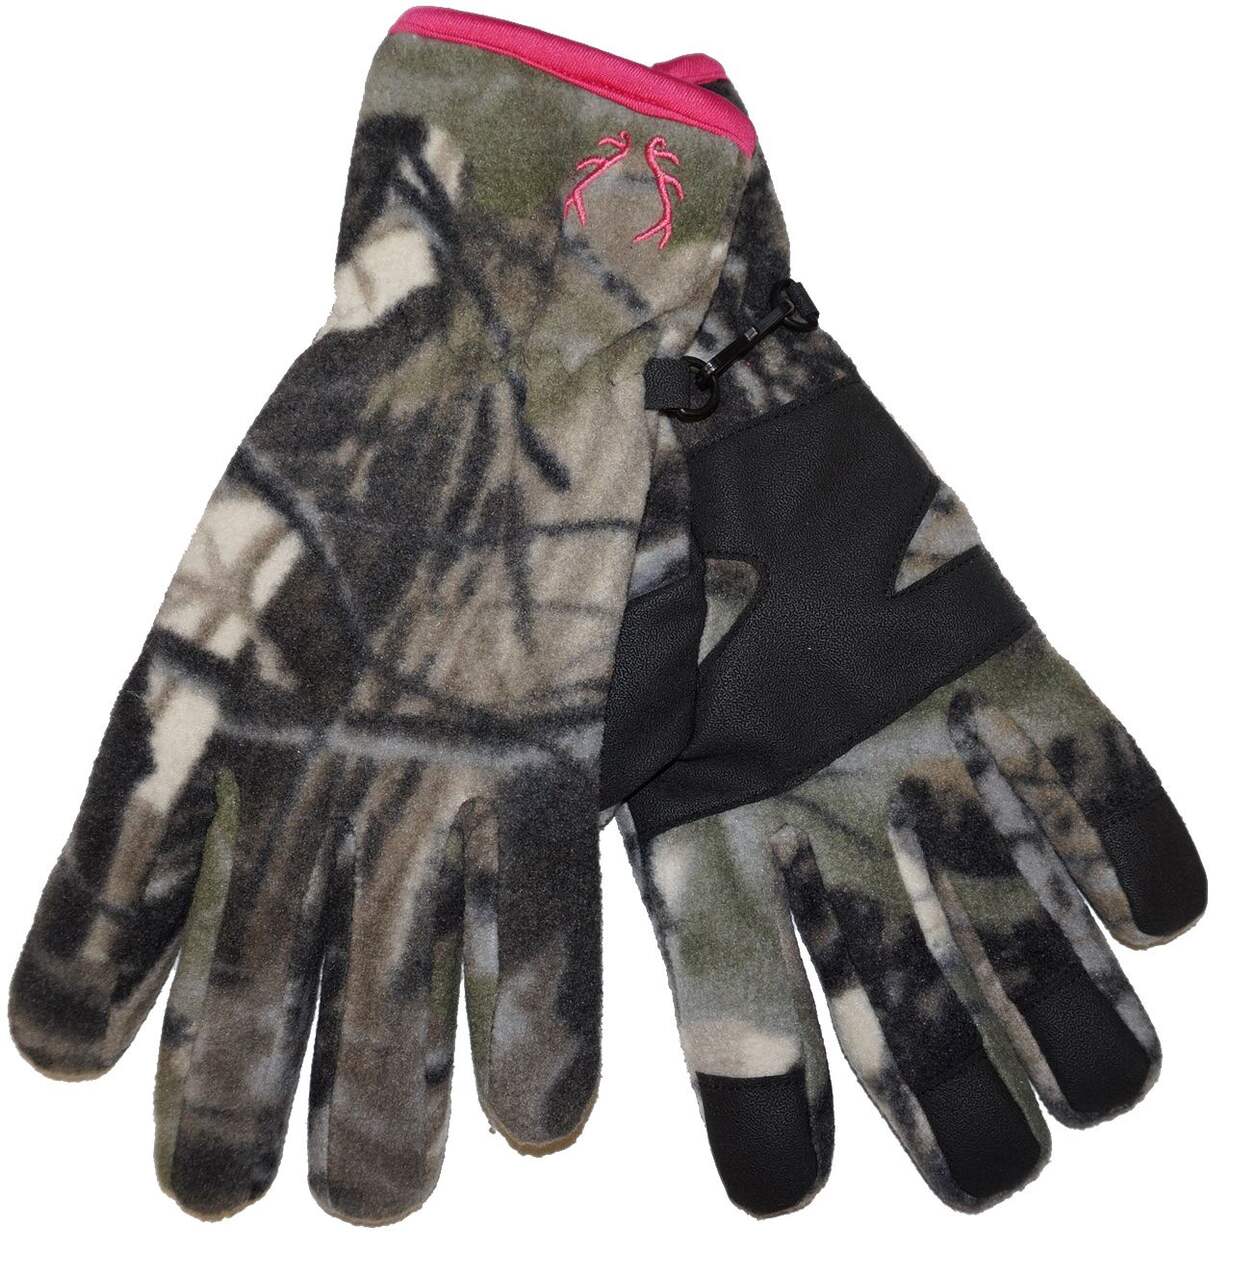 Hot Shot Women's Warm Insulated Fleece Hunting Gloves with Non